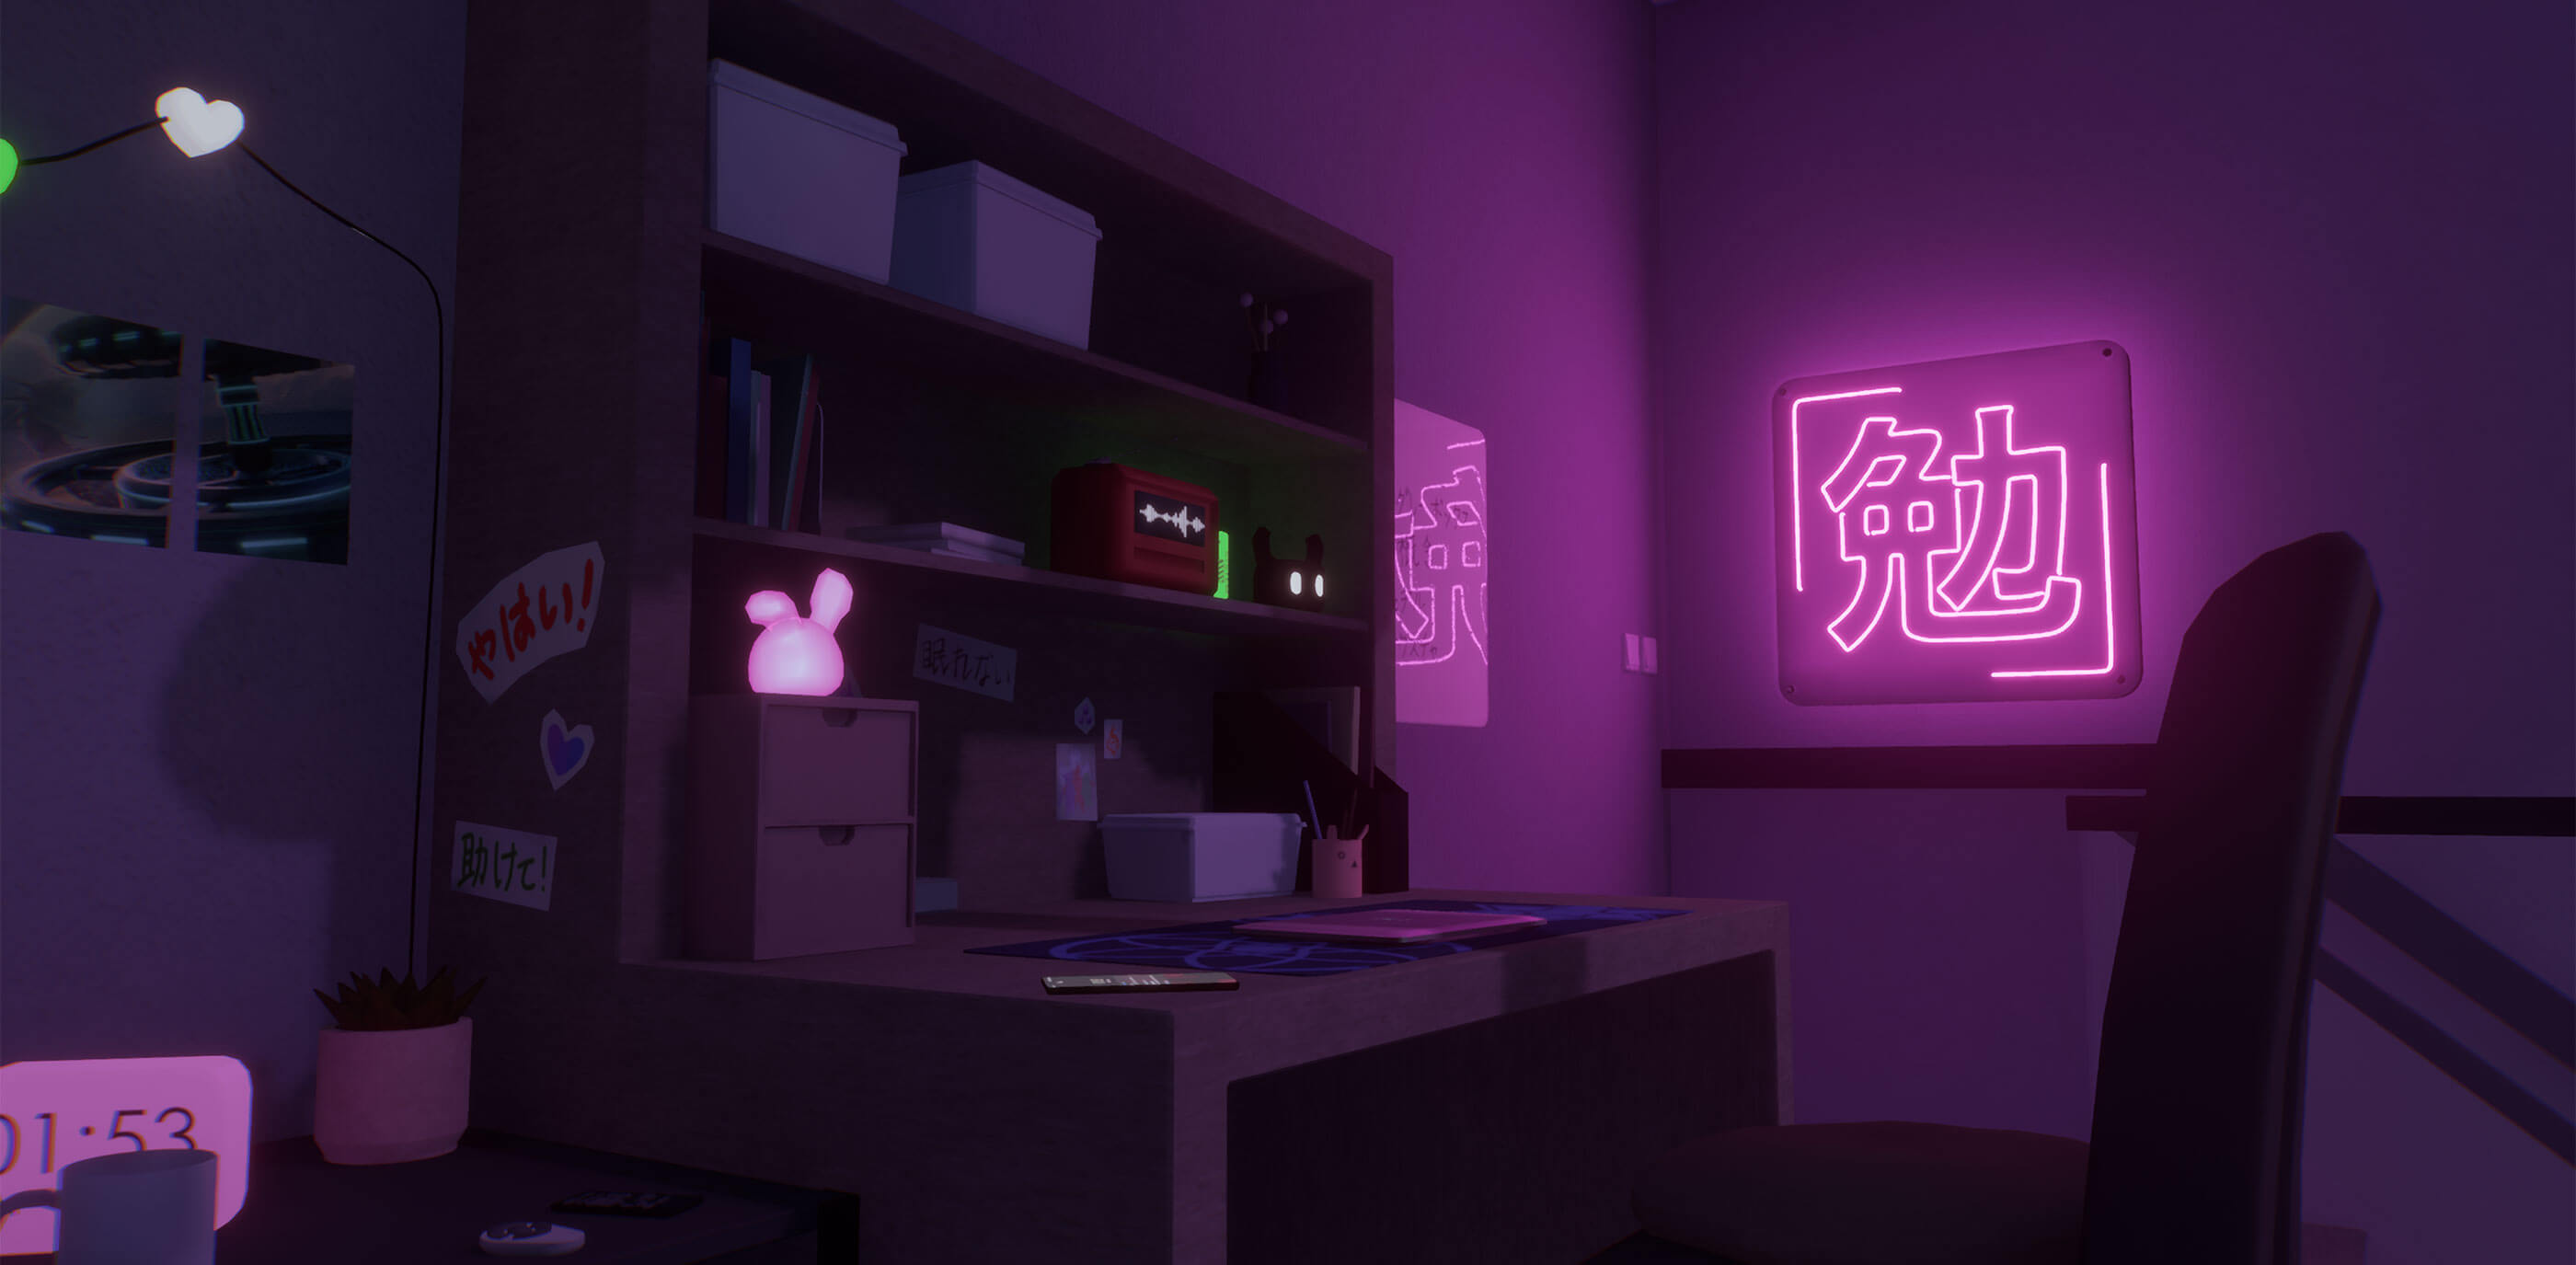 3D scene with a desk illuminated by a neon sign in the shape of a Japanese kanji.